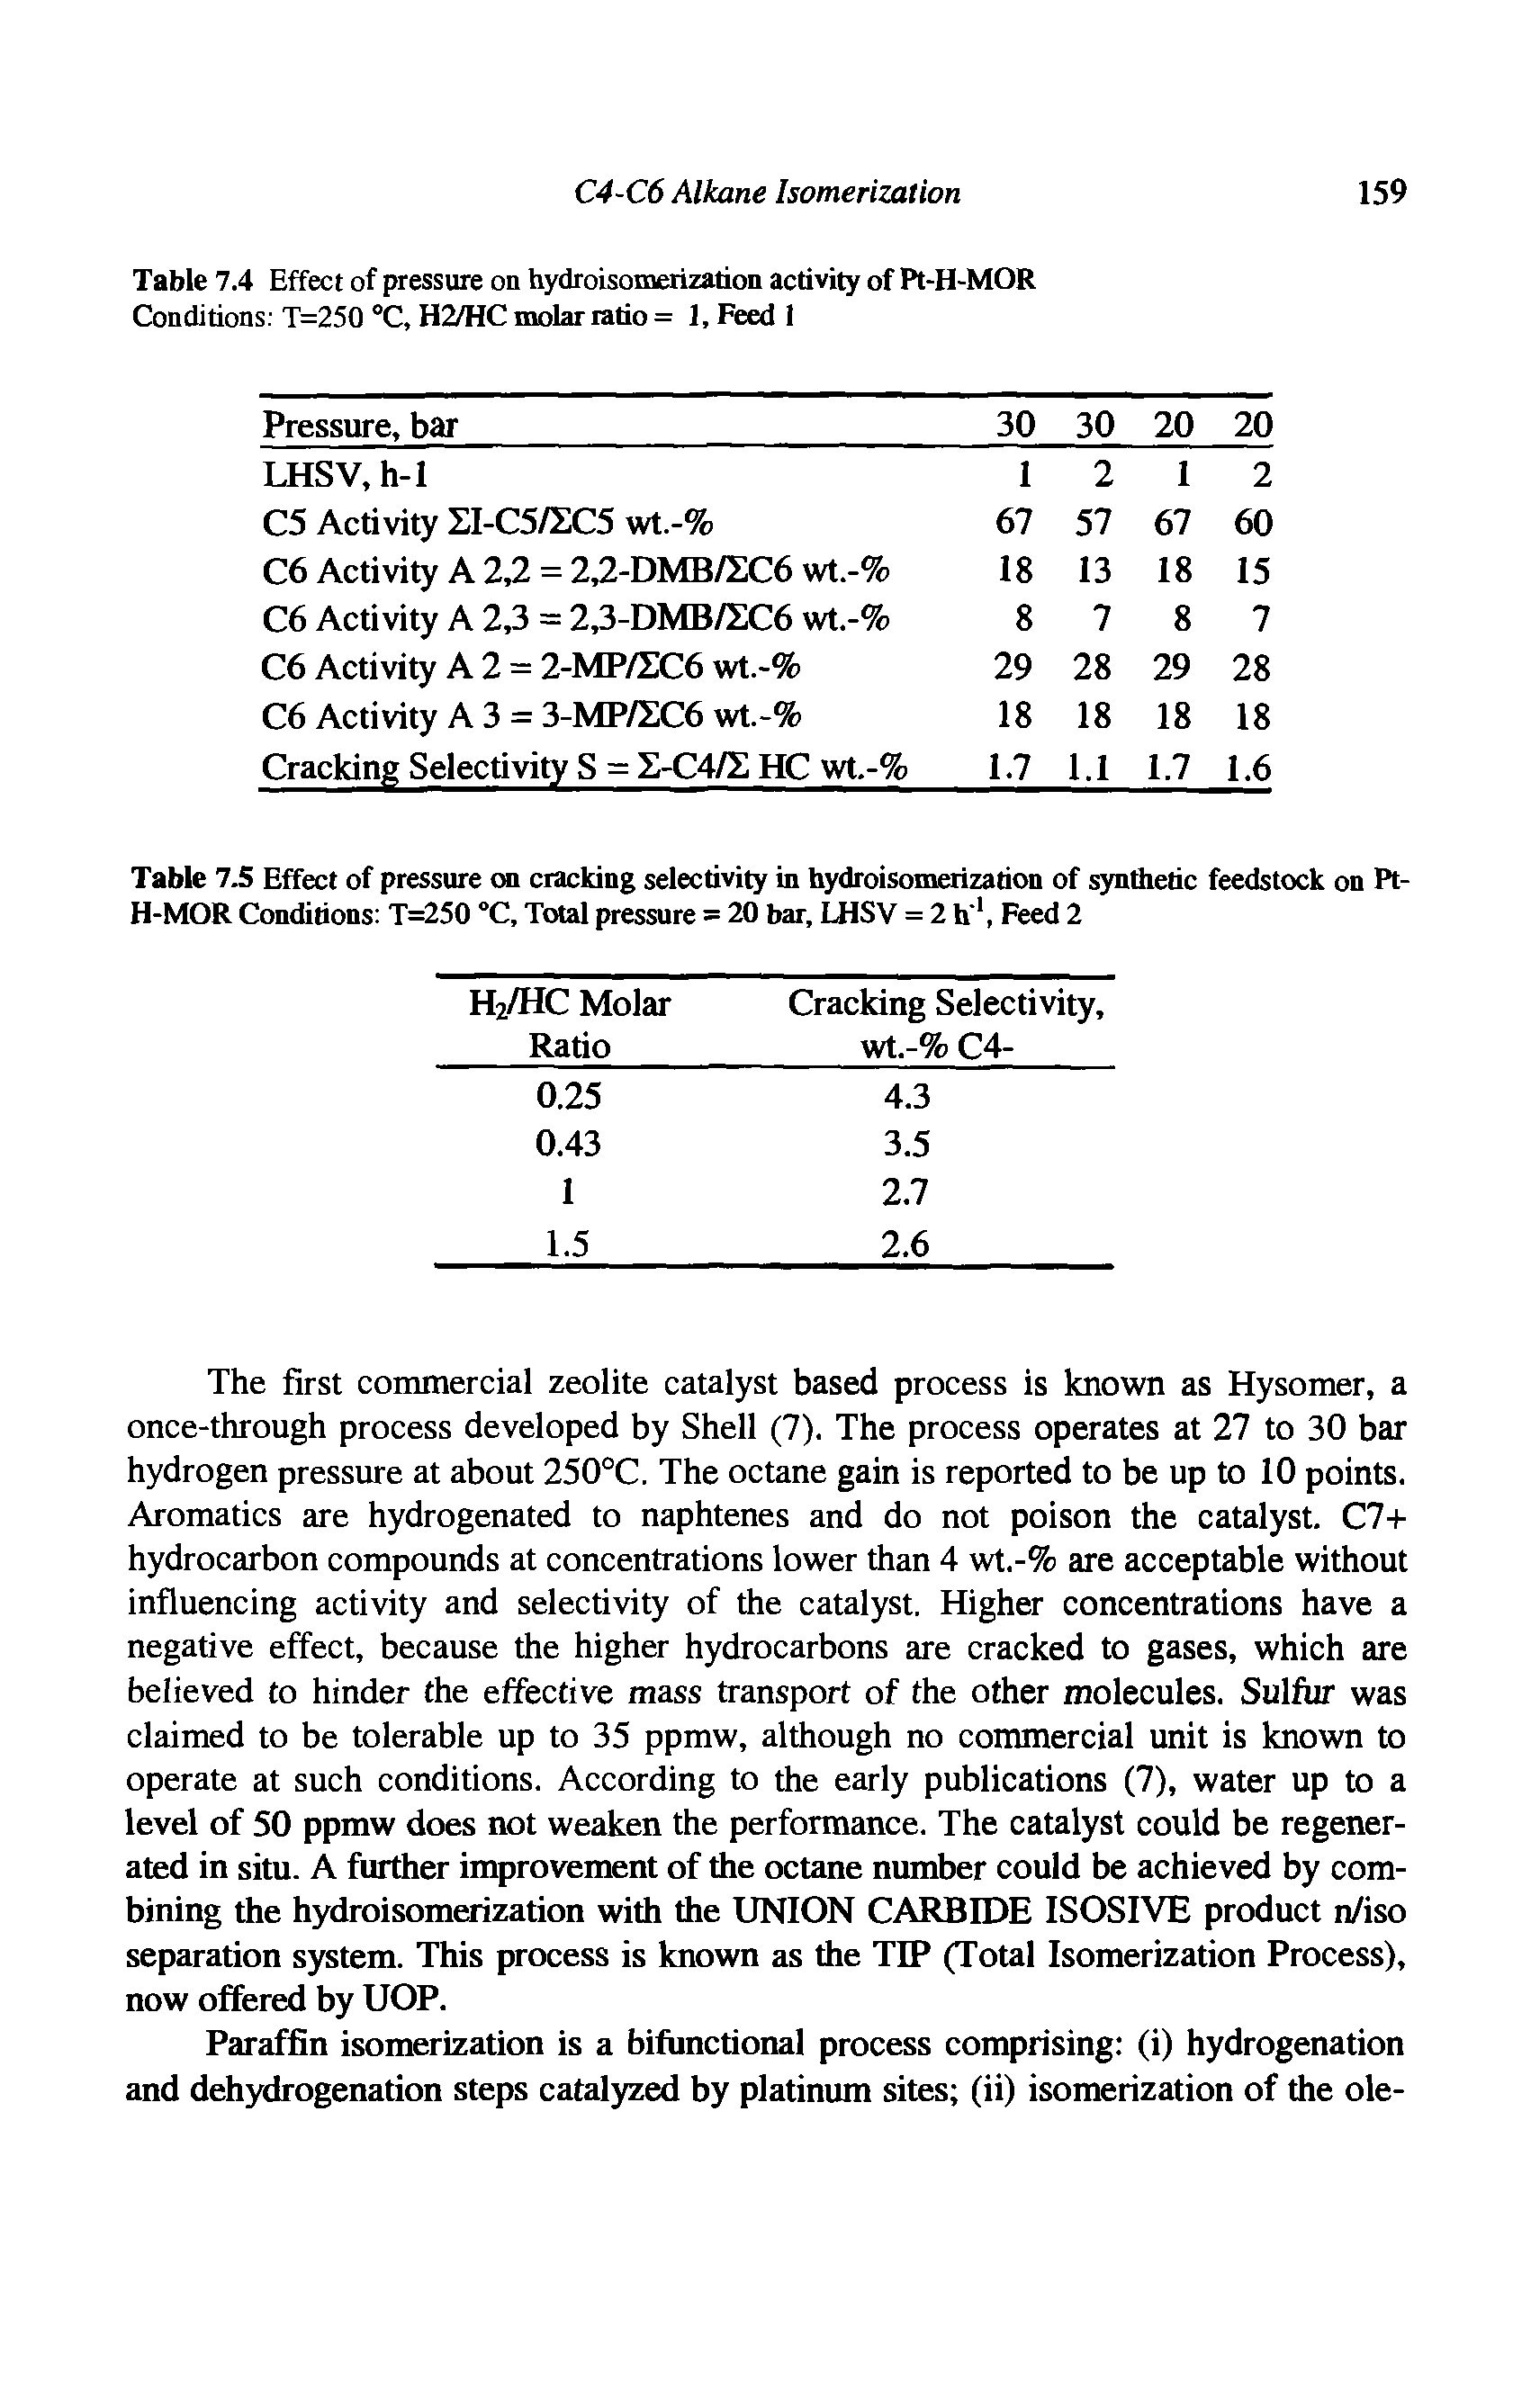 Table 7.5 Effect of pressure on cracking selectivity in hydroisomerization of synthetic feedstock on Pt-H-MOR Conditions T=250 °C, Total pressure = 20 bar, LHSV = 2 h 1, Feed 2...